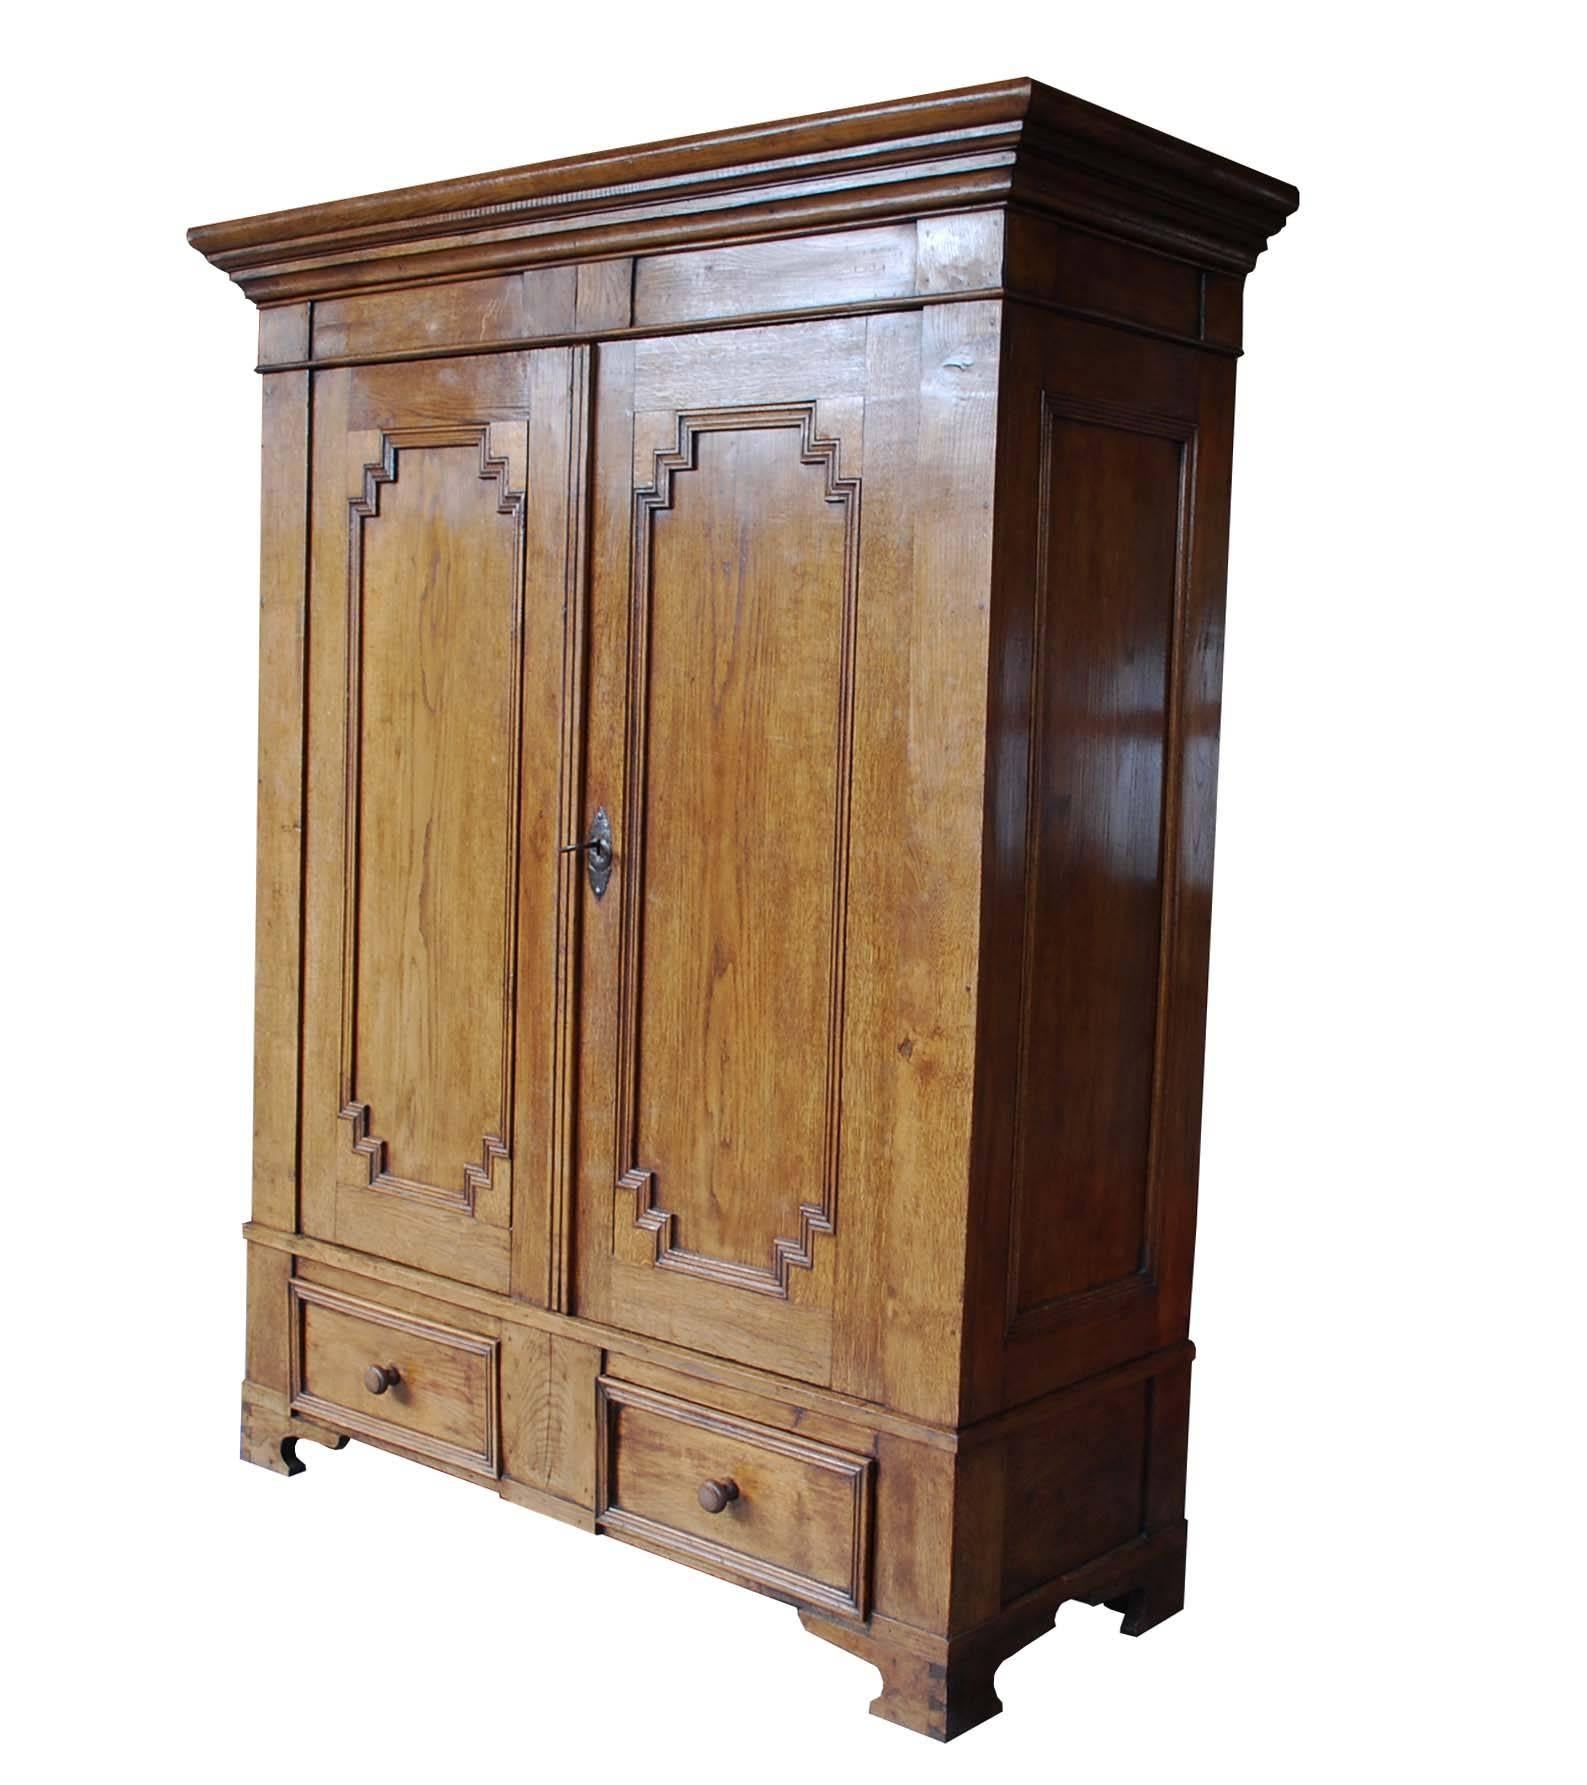 This solid oakwood cabinet originates in the German state of Nortrein Westphalen and it dates circa 1850. The cabinet can be disassembled in pieces. The cabinet has two drawers with wooden knobs and two doors. On the interior there are two fixed